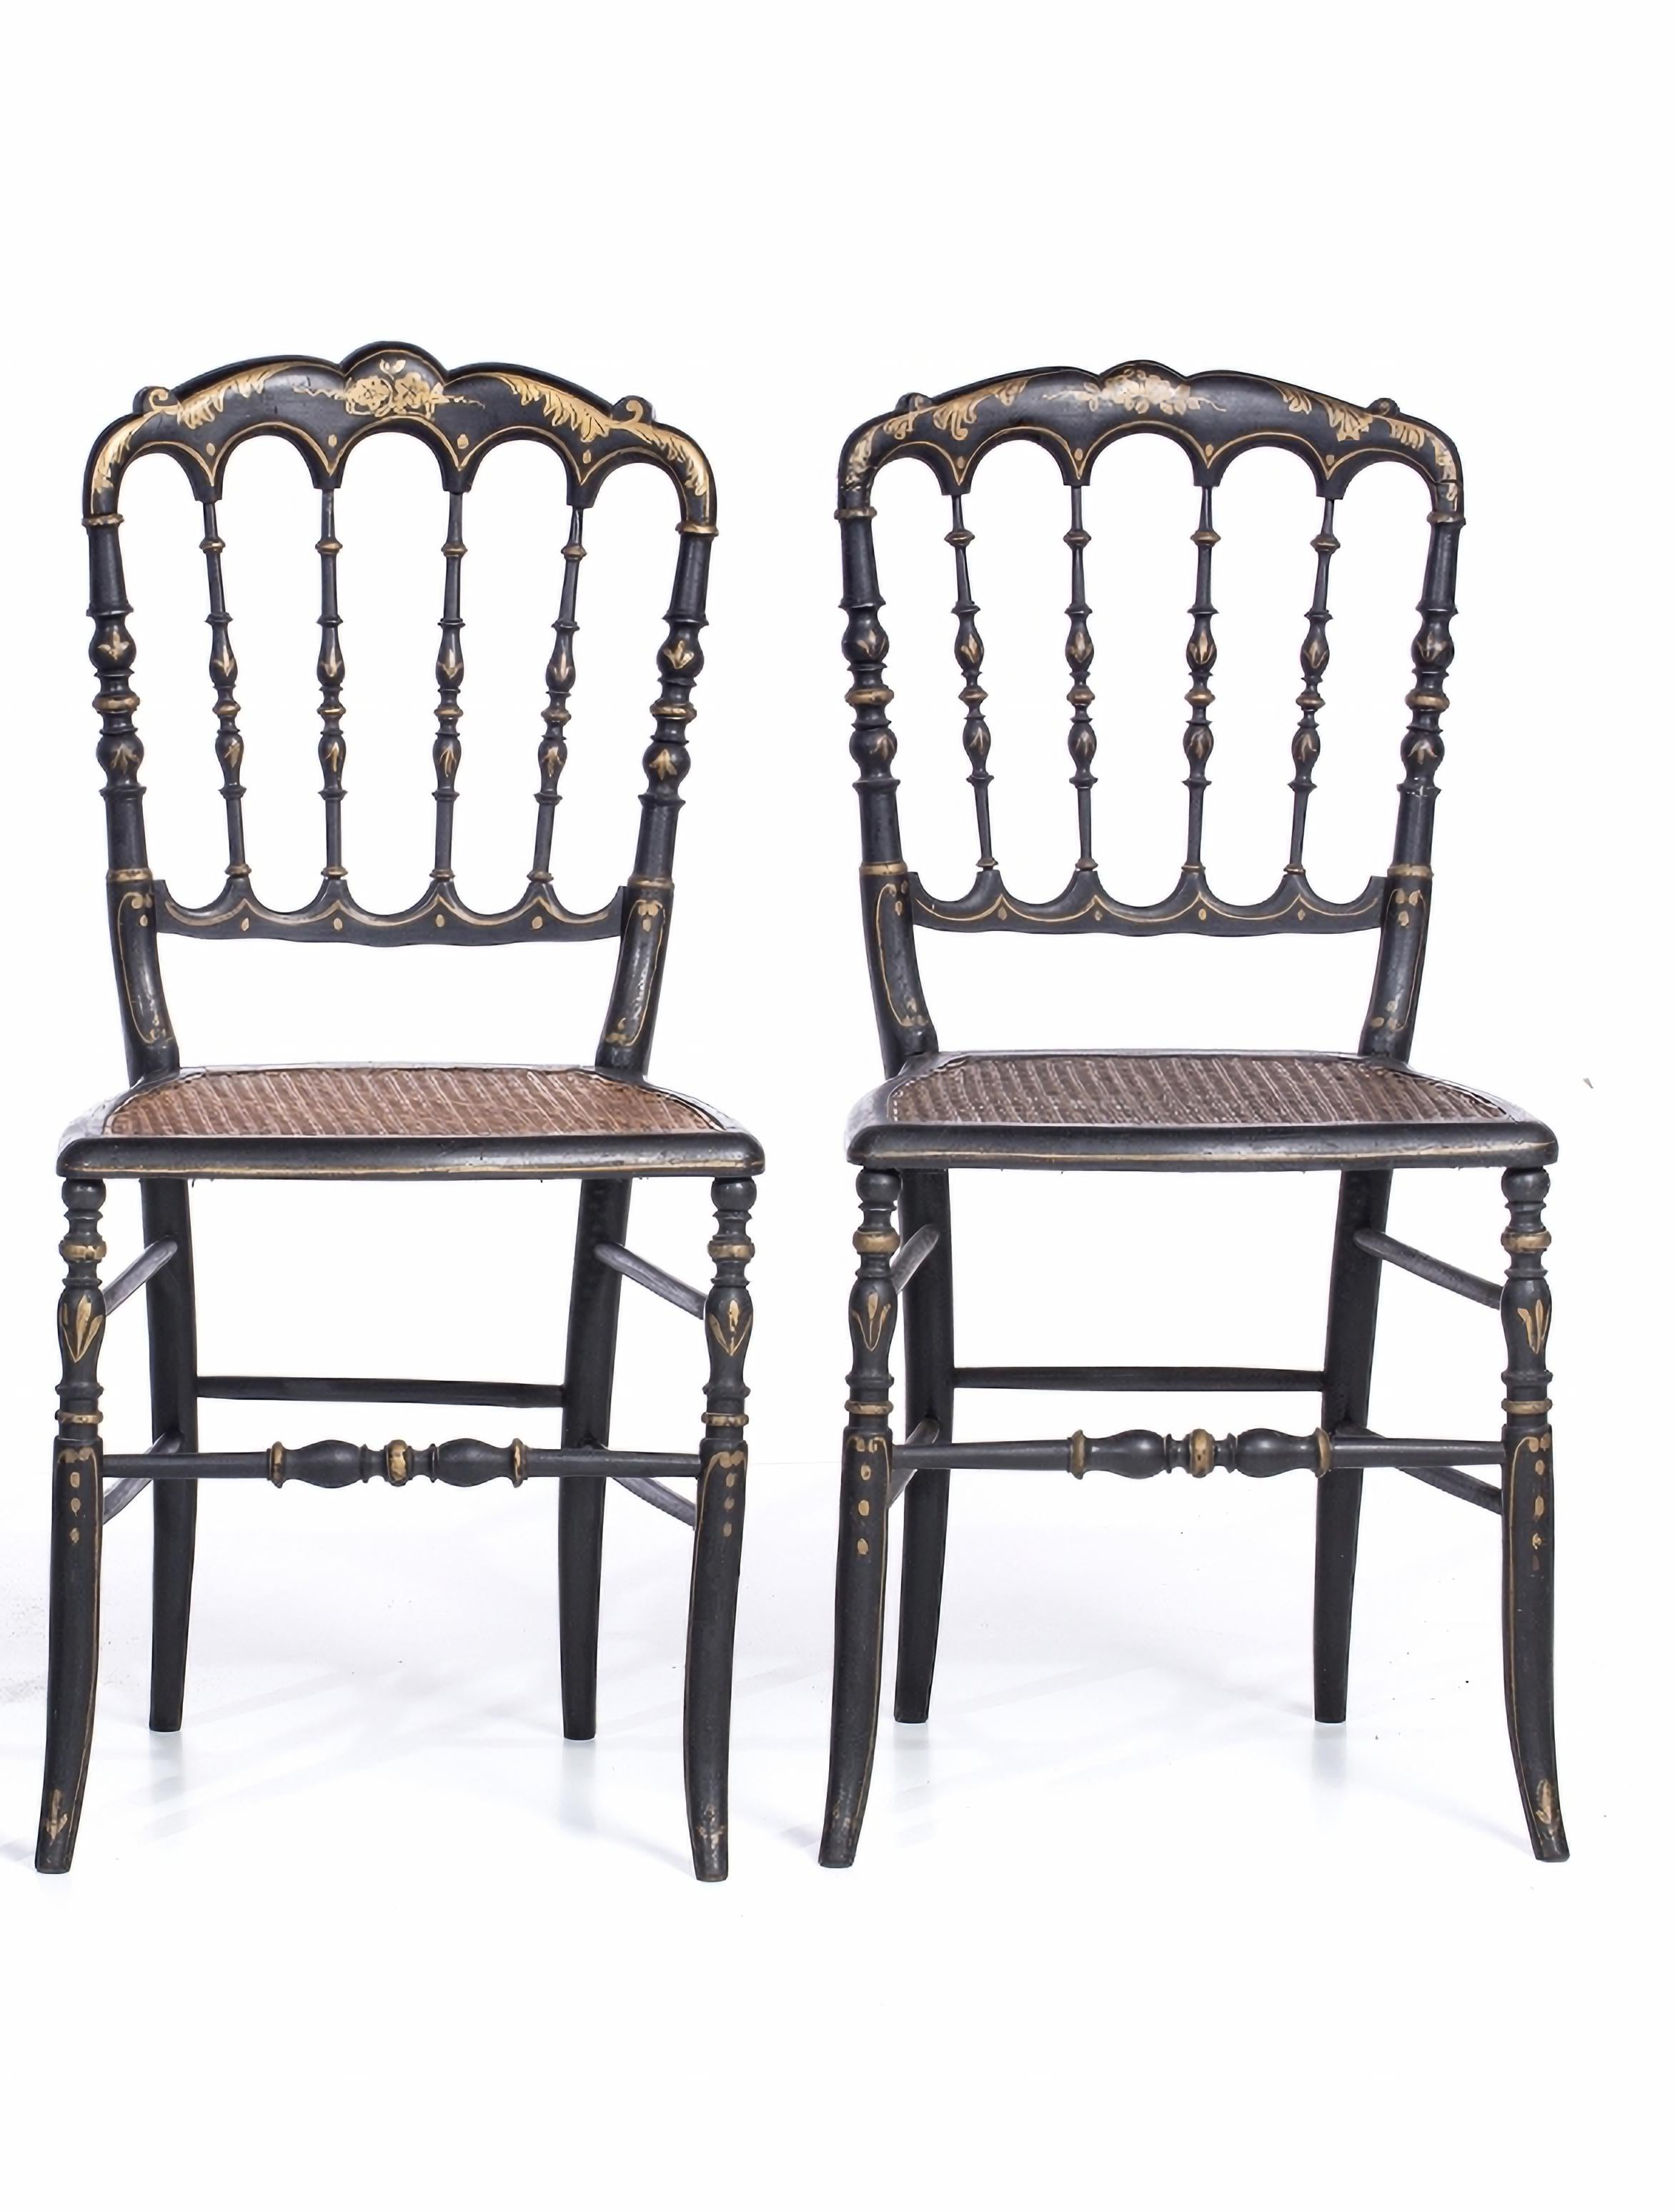 Baroque Set of Two Portuguese Chairs 19th Century